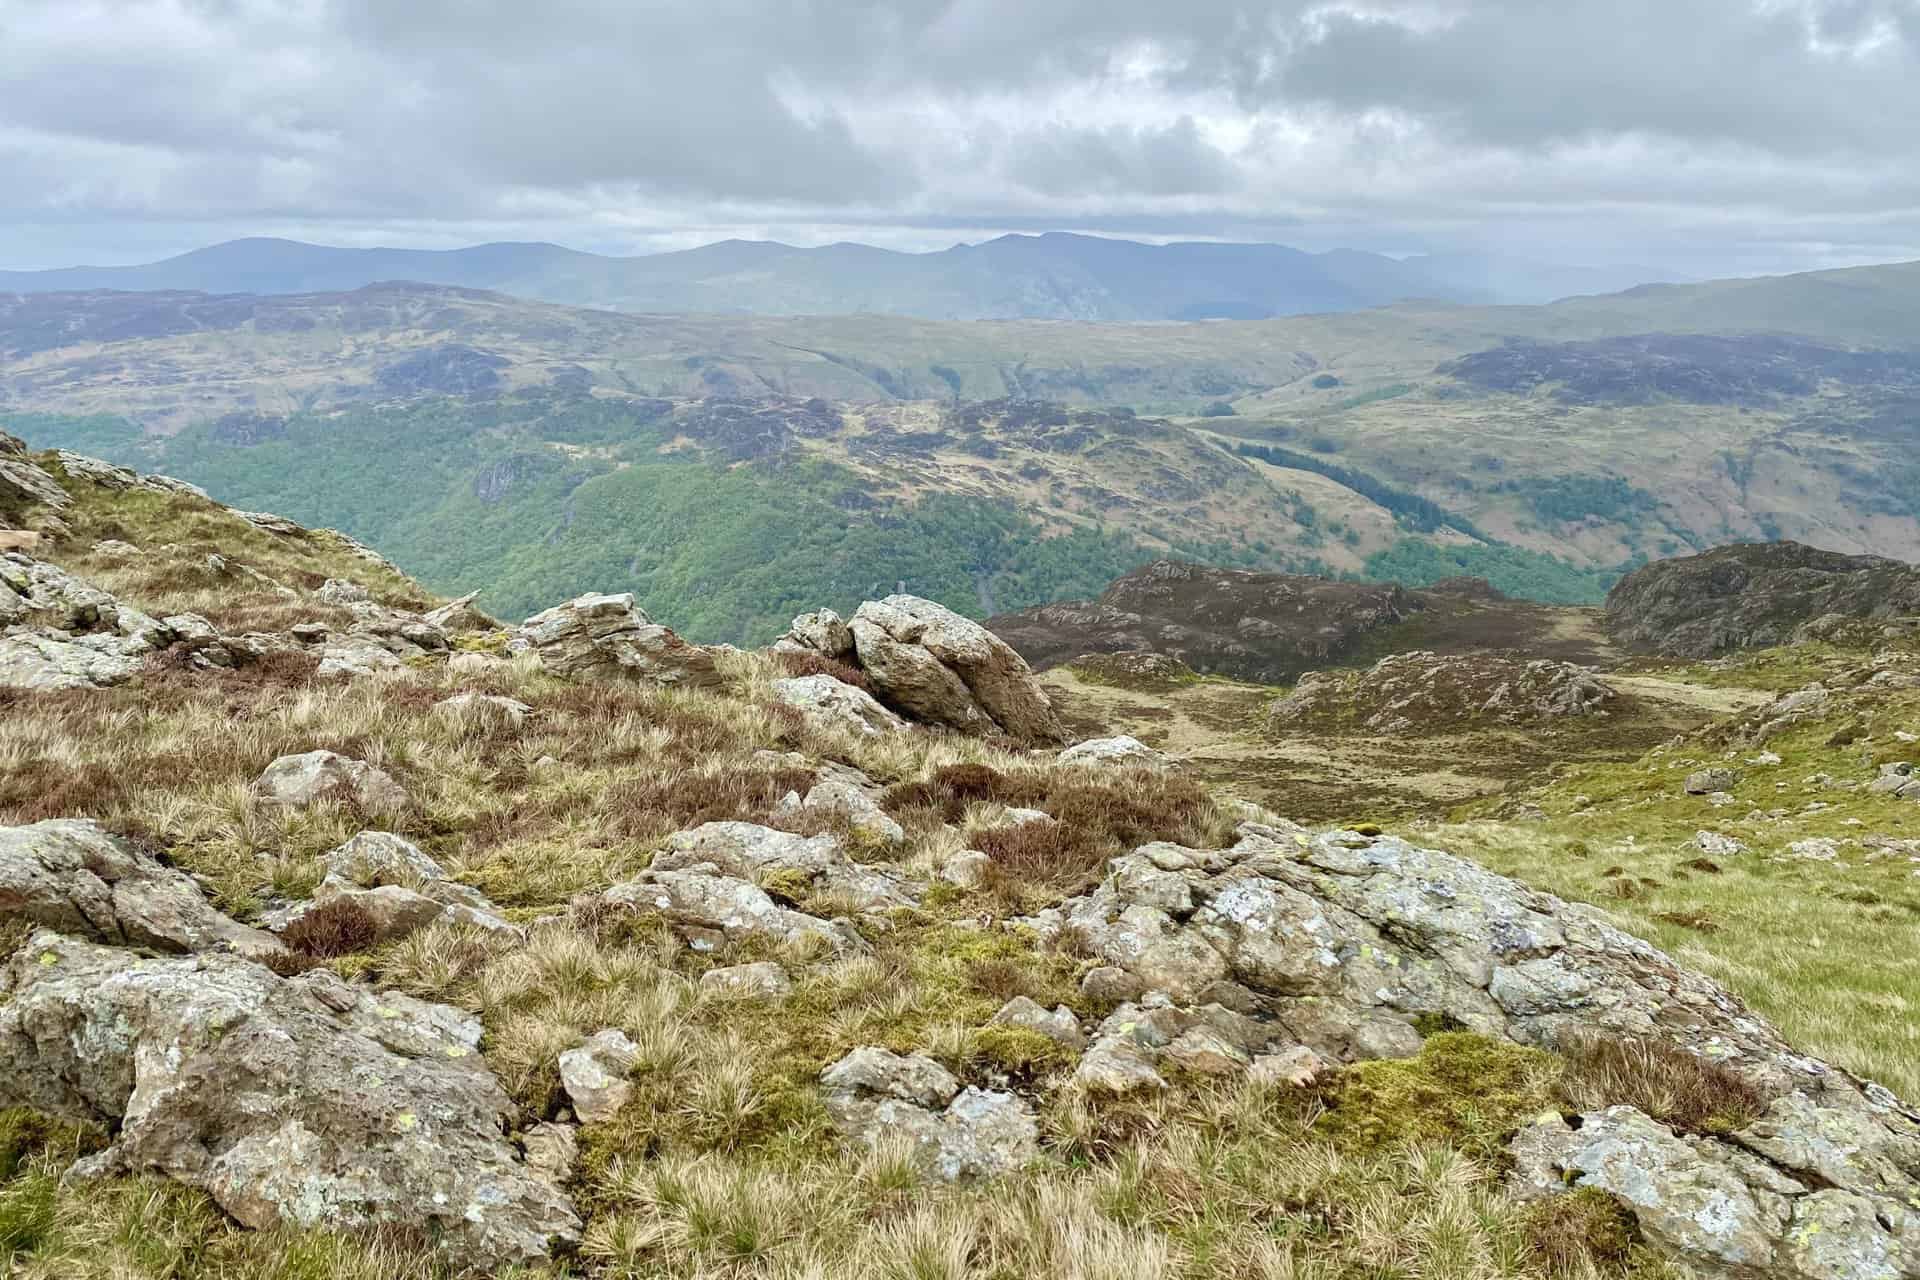 The view east from Minum Crag towards the Helvellyn mountain range in the distance on the horizon.